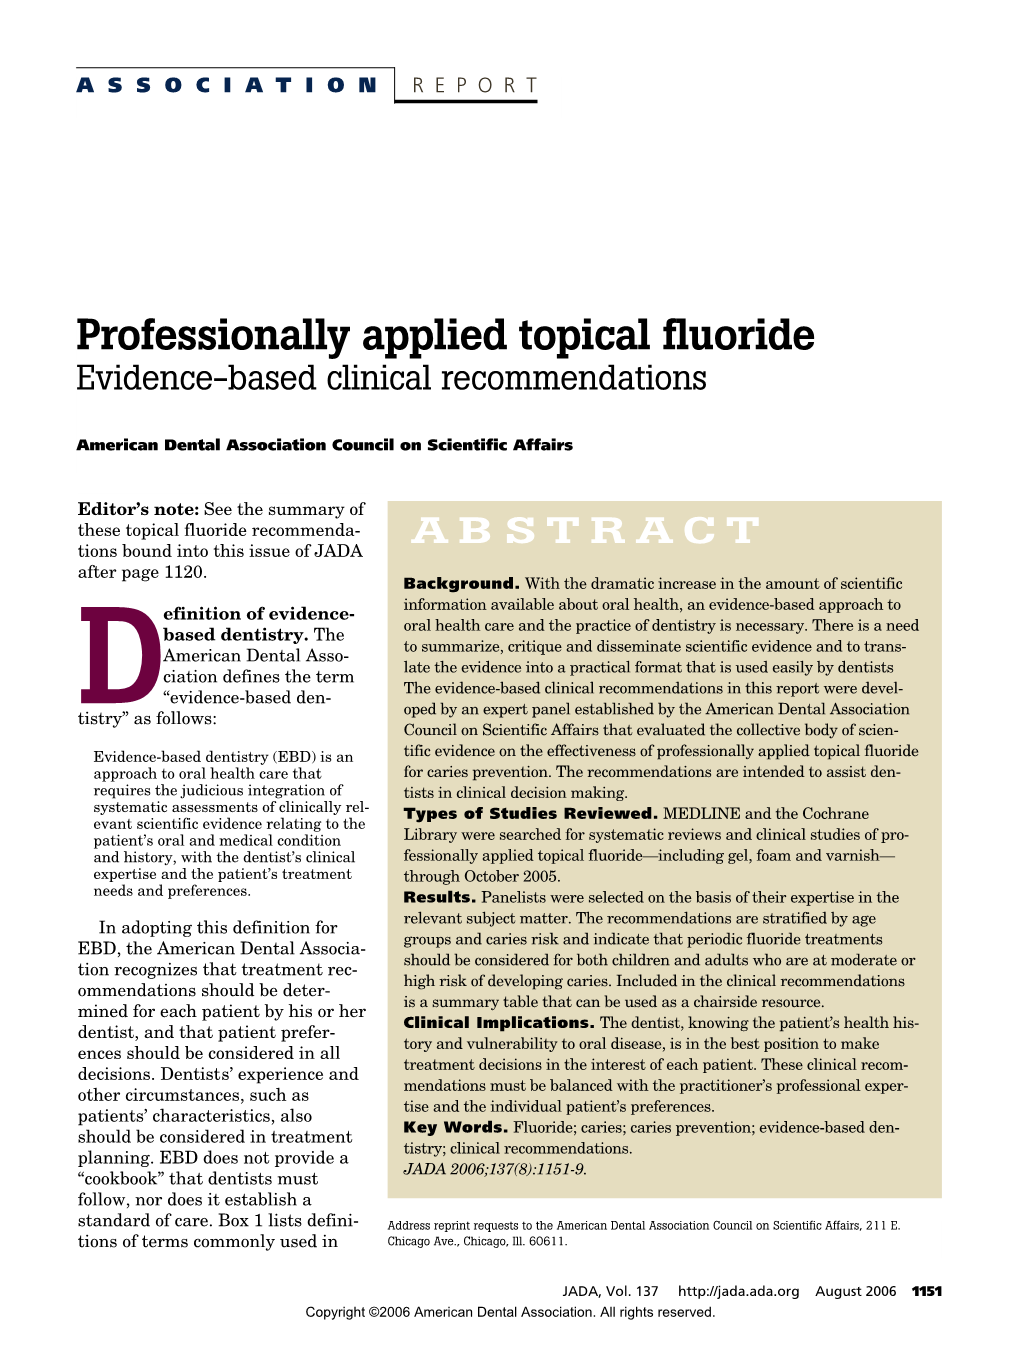 Professionally Applied Topical Fluoride Evidence-Based Clinical Recommendations